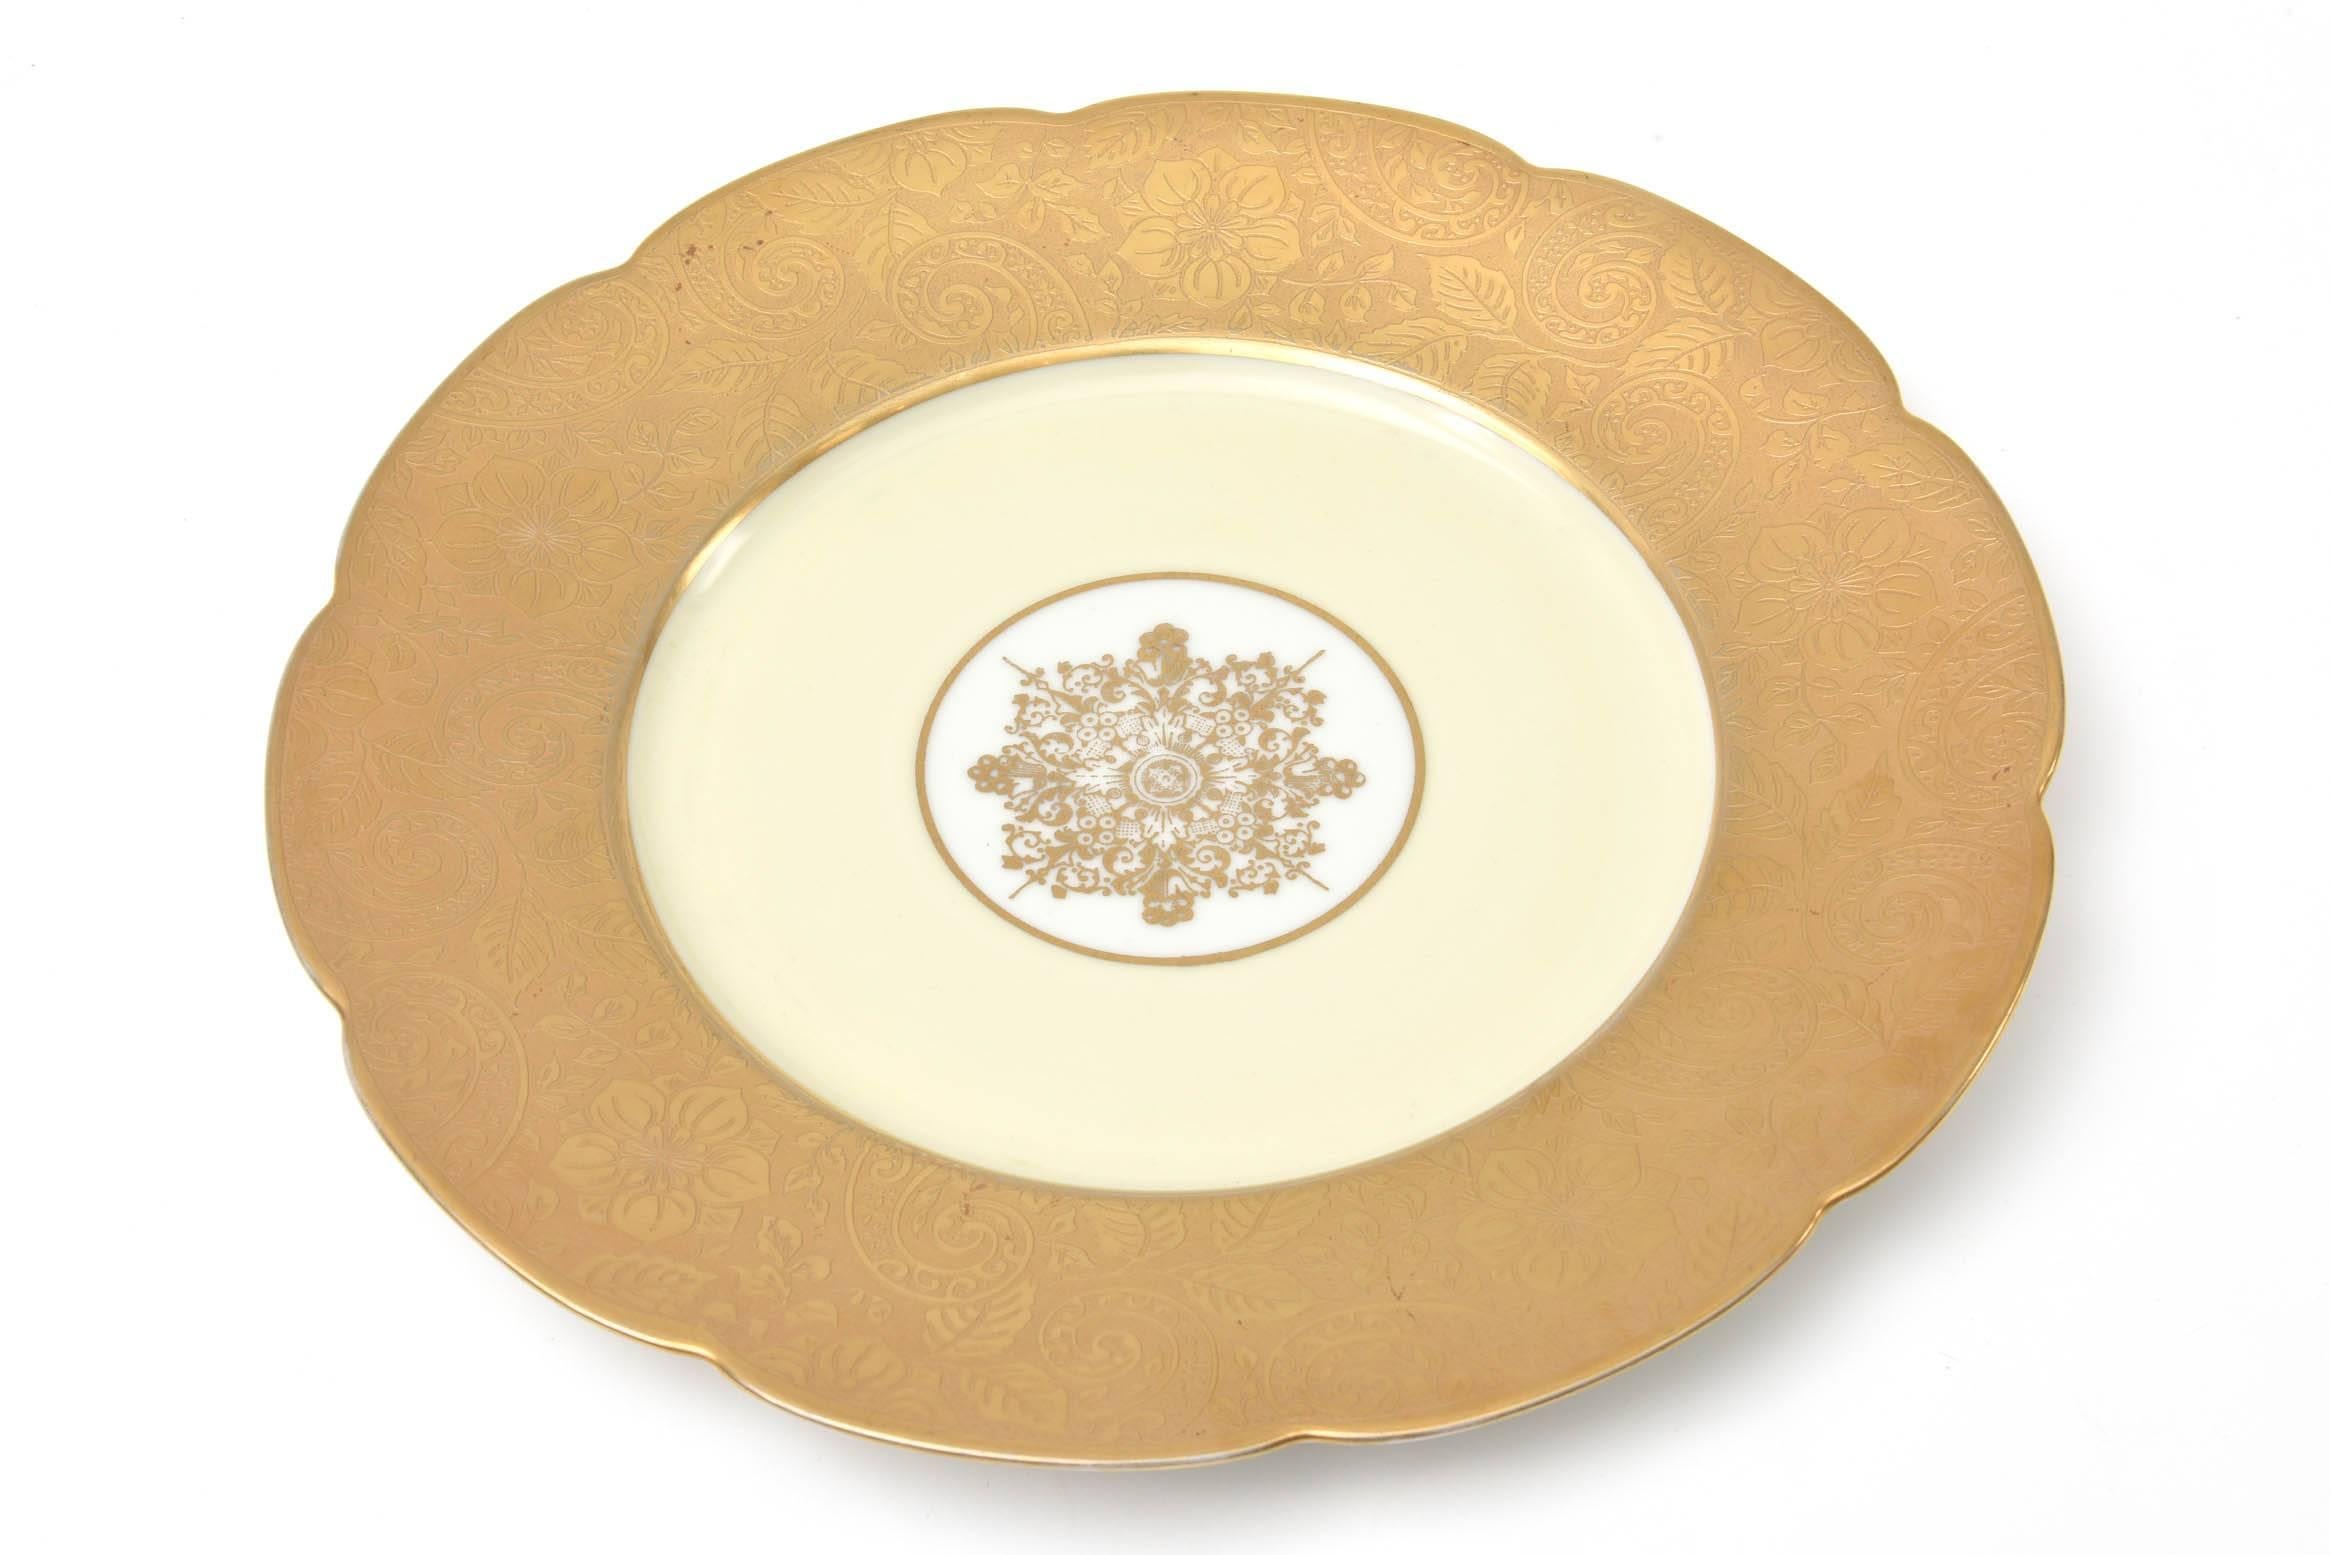 A very impressive set of 12 antique gilt encrusted presentation plates or charges featuring a nicely hand finished scallop shape and 24-karat gilt medallion. From the storied German firm of Heinrich who produced many custom table top pieces in the